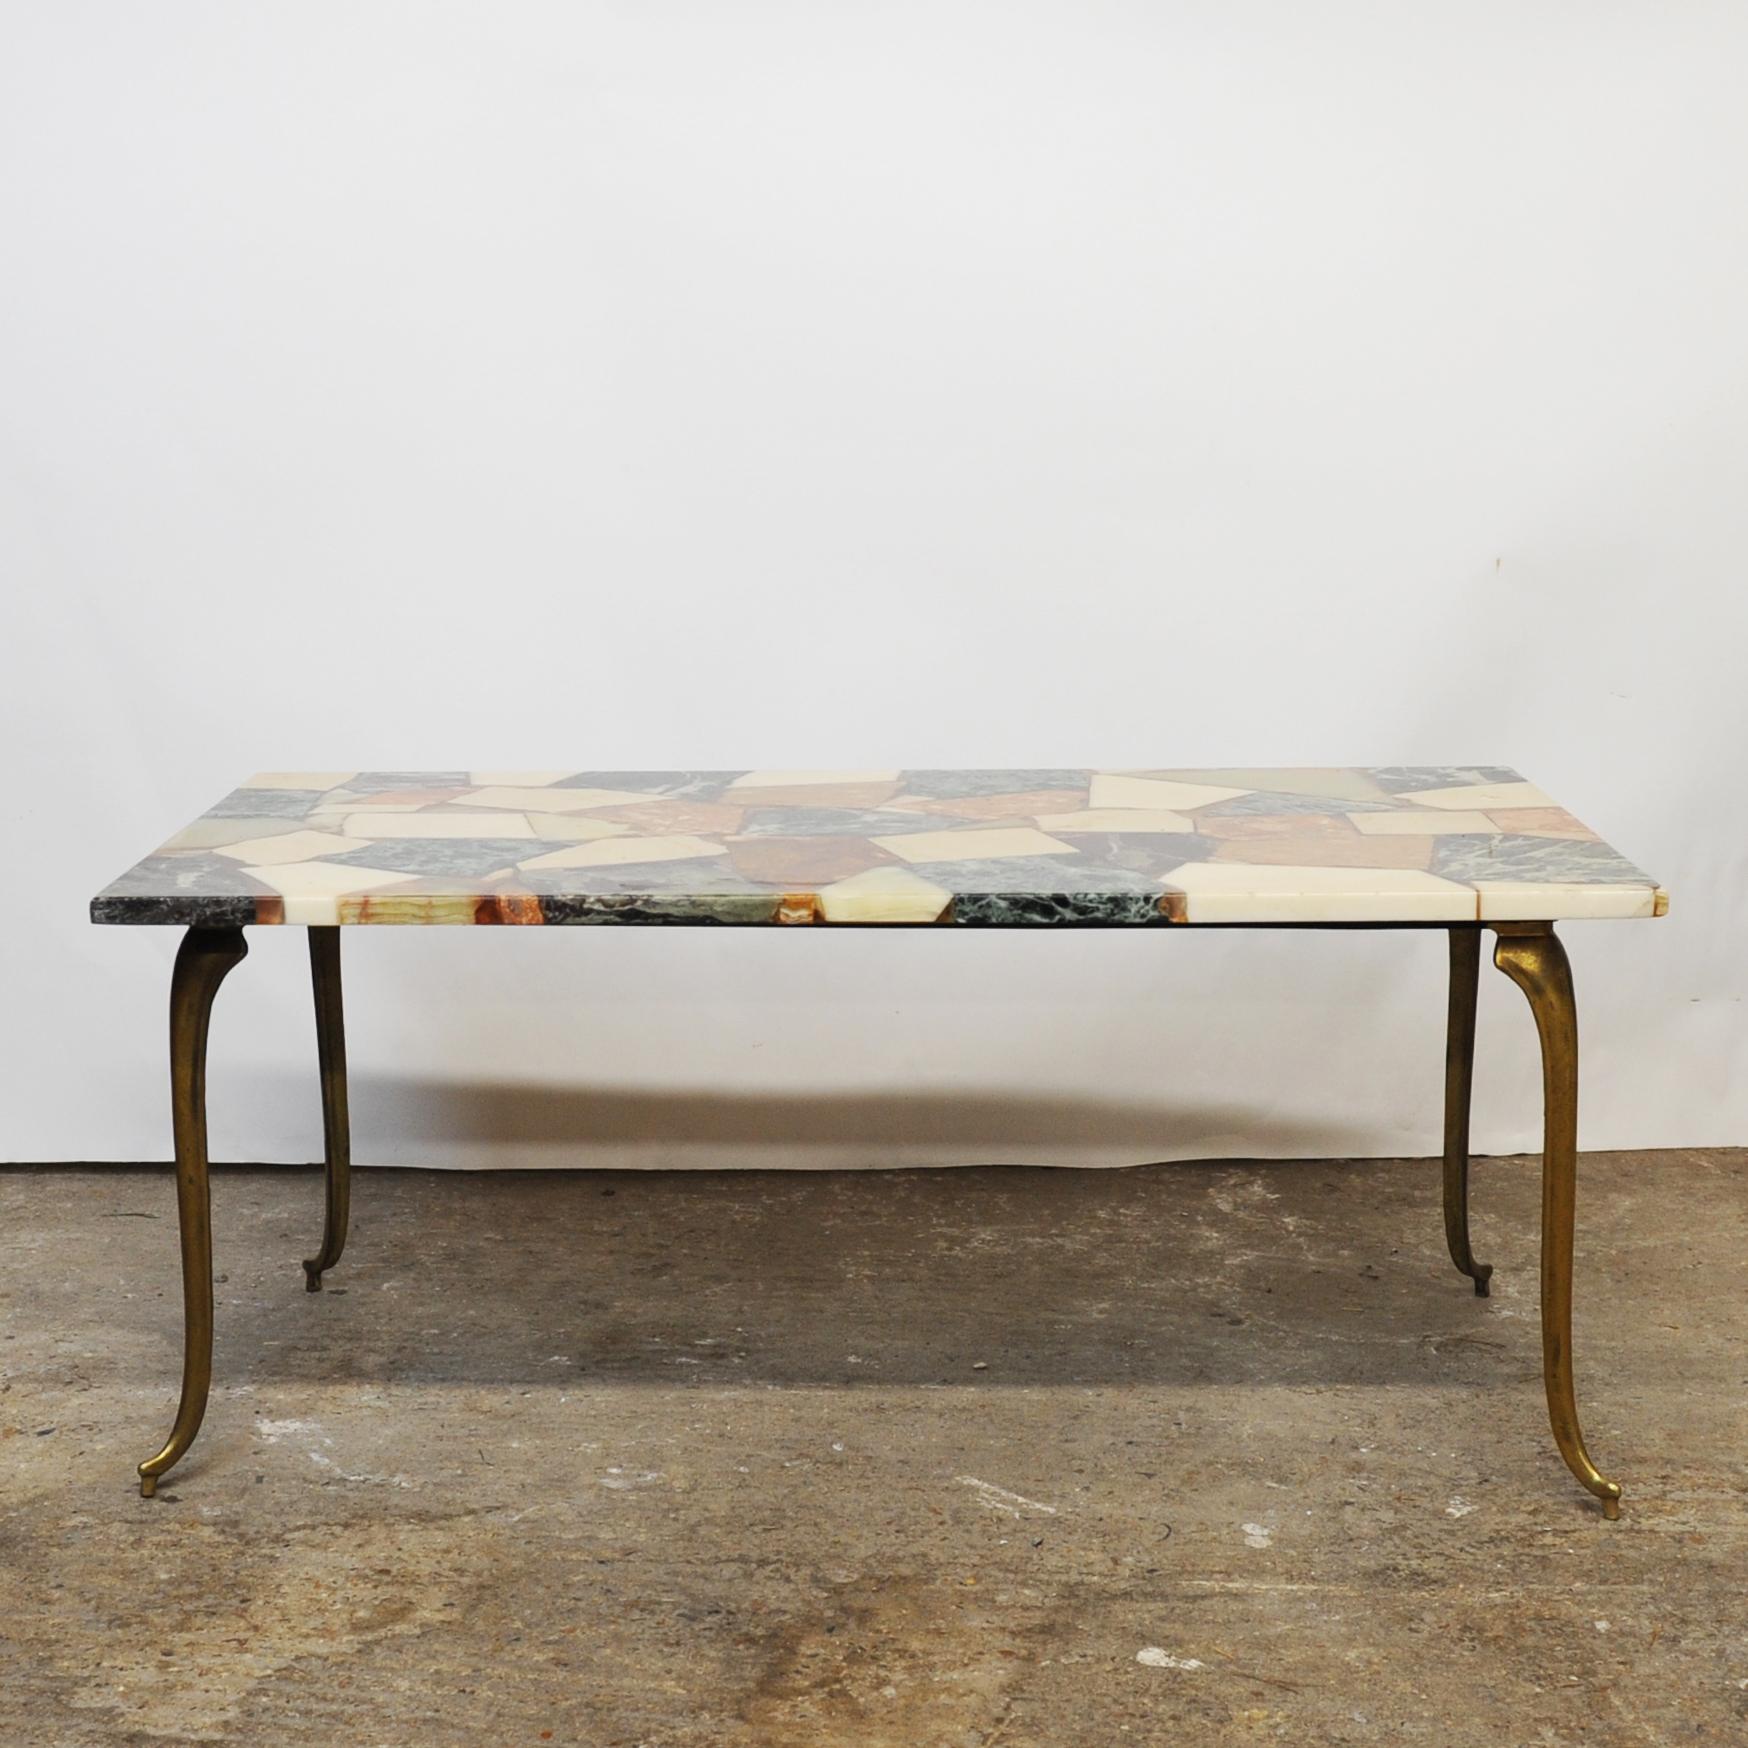 A rectangular coffee table with onyx ‘stone’ shapes with resin. The table sits on decorative brass legs.

Designer - Unknown

Design Period - 1970 to 1979

Detailed Condition - Good with minimal defects. 

Restoration and Damage Details - Light wear